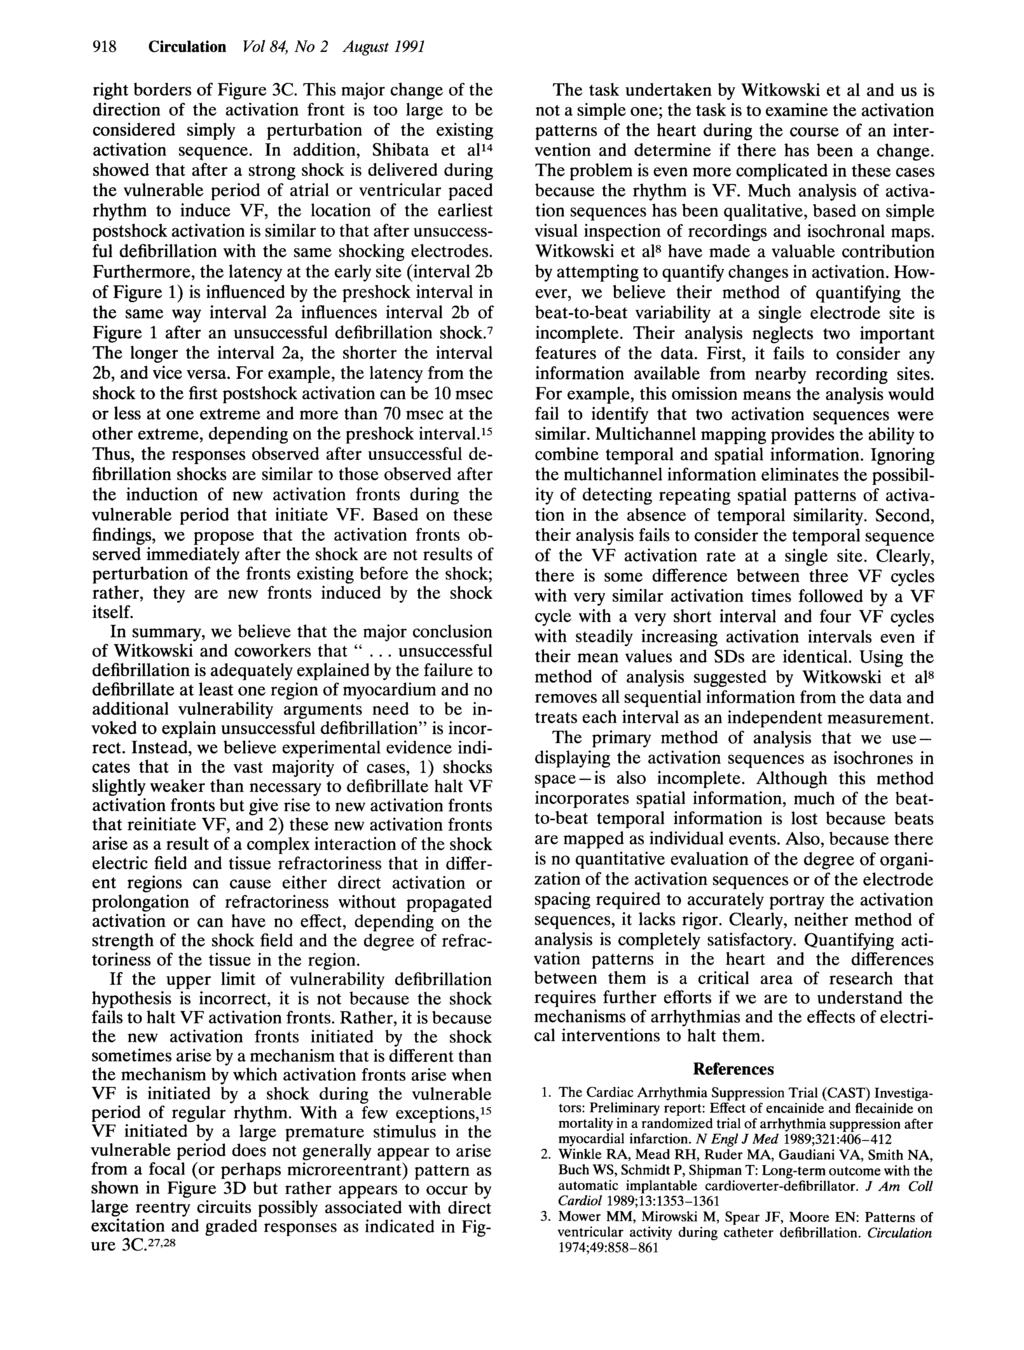 Downloaded from http://ahajournals.org by on October 17, 218 918 Circulation Vol 84, No 2 August 1991 right borders of Figure 3C.